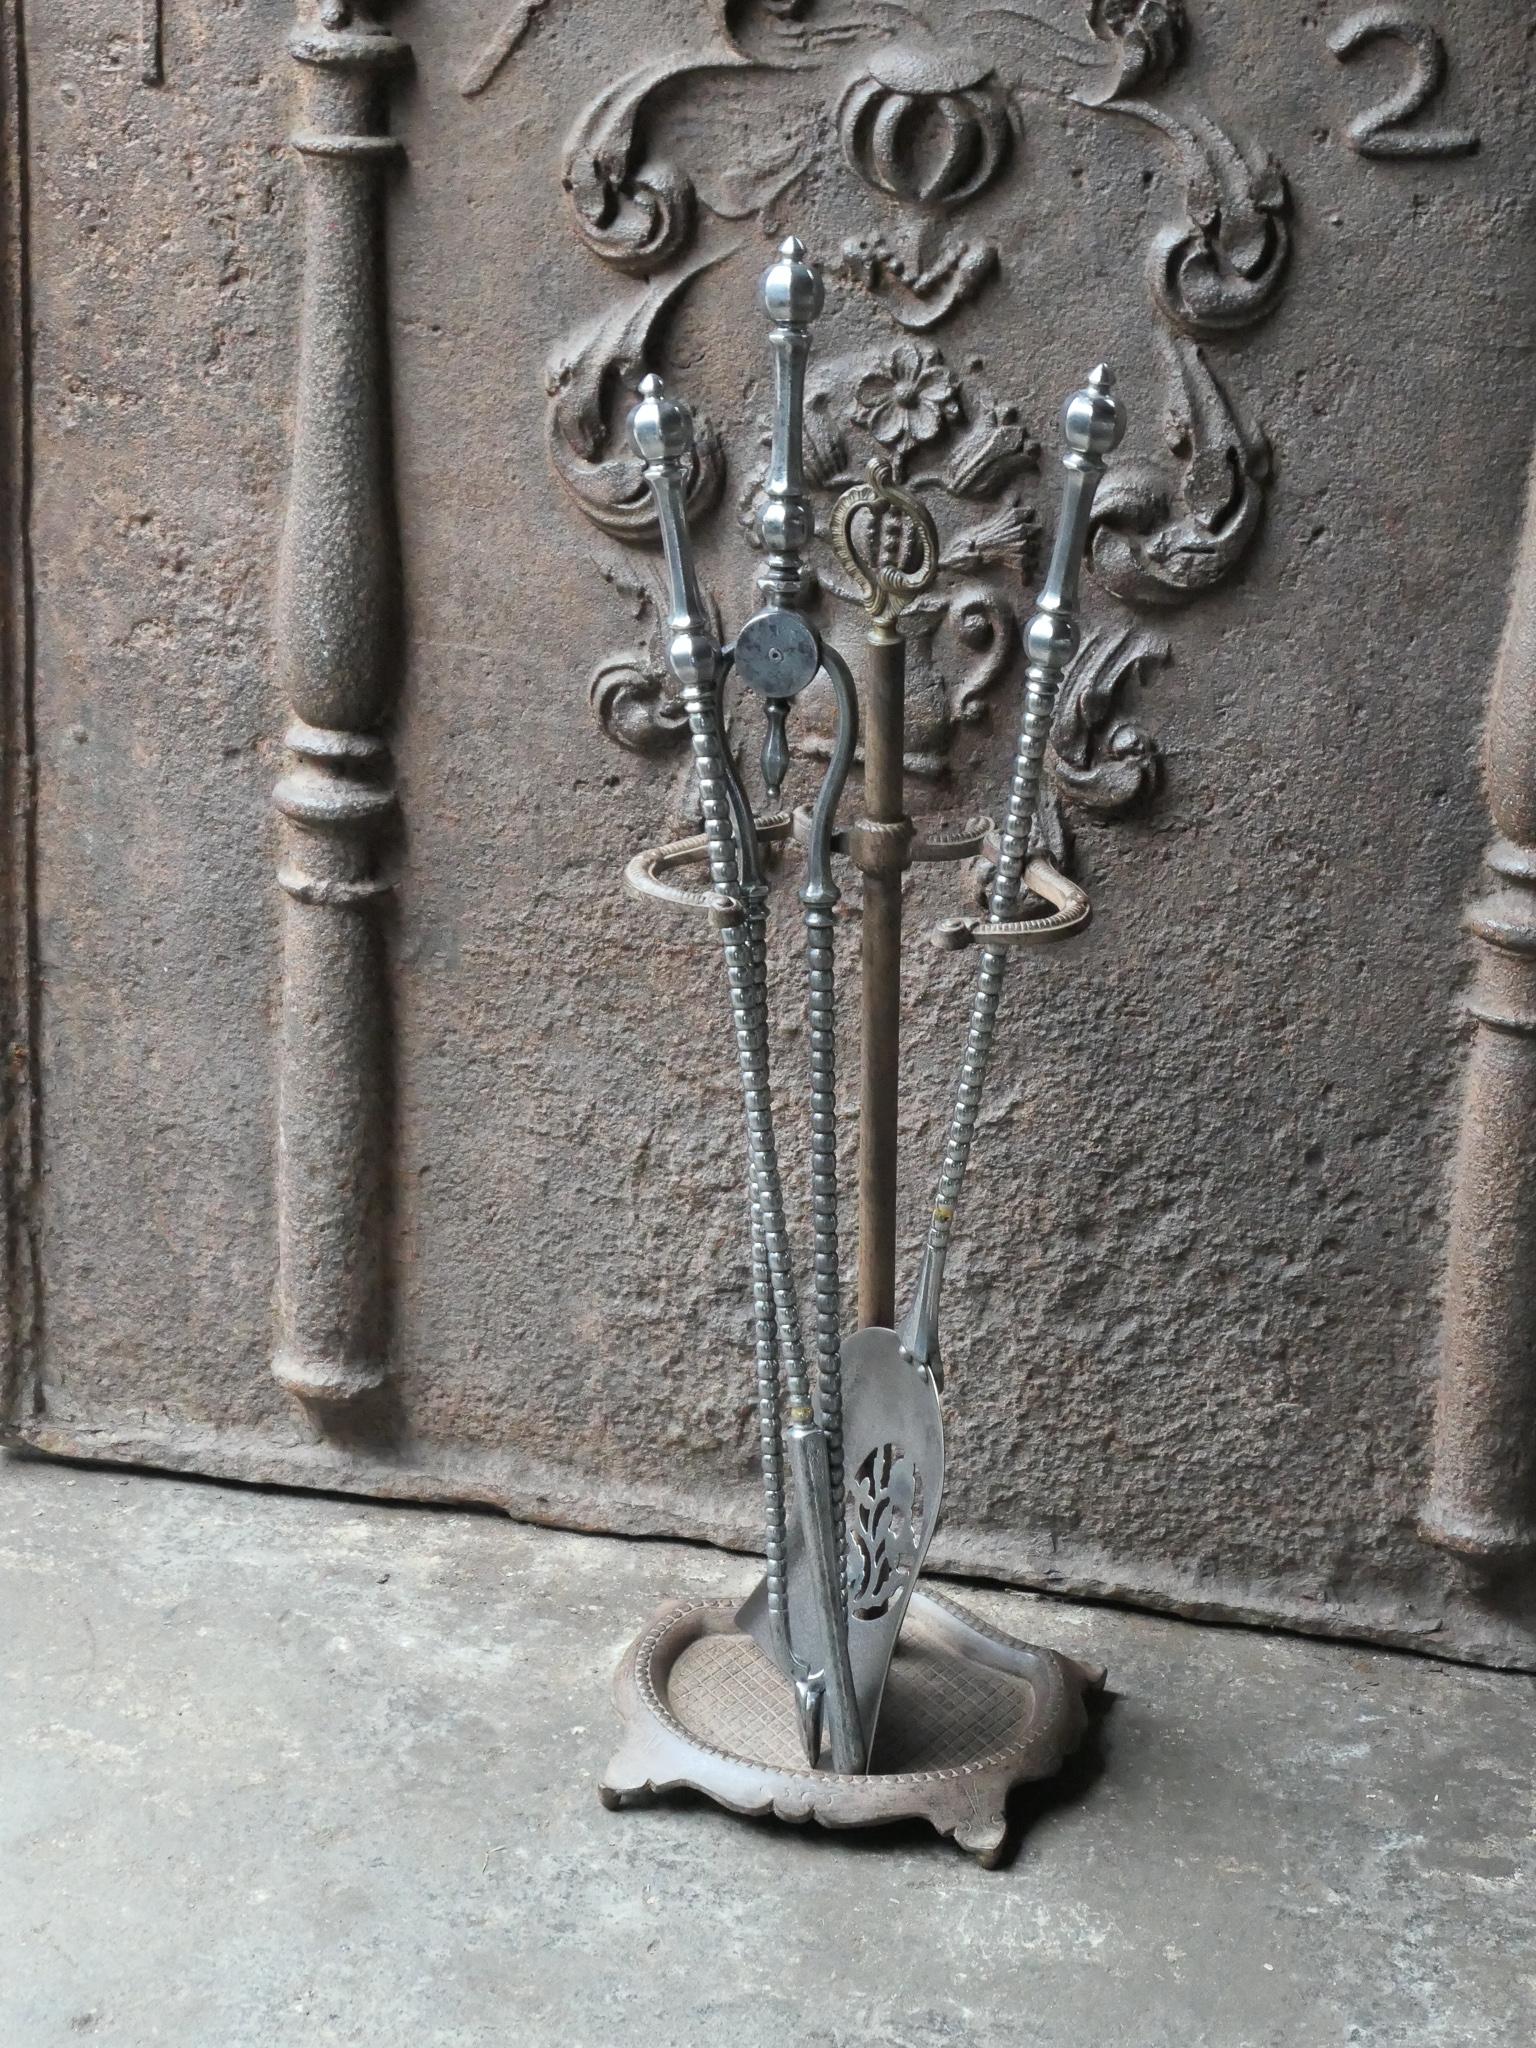 18/19th century English Georgian fireside companion set. The tool set consists of thongs, shovel, poker and stand. Made of cast iron and wrought iron (stand) and polished steel (tools). It is in a good condition and is fully functional.